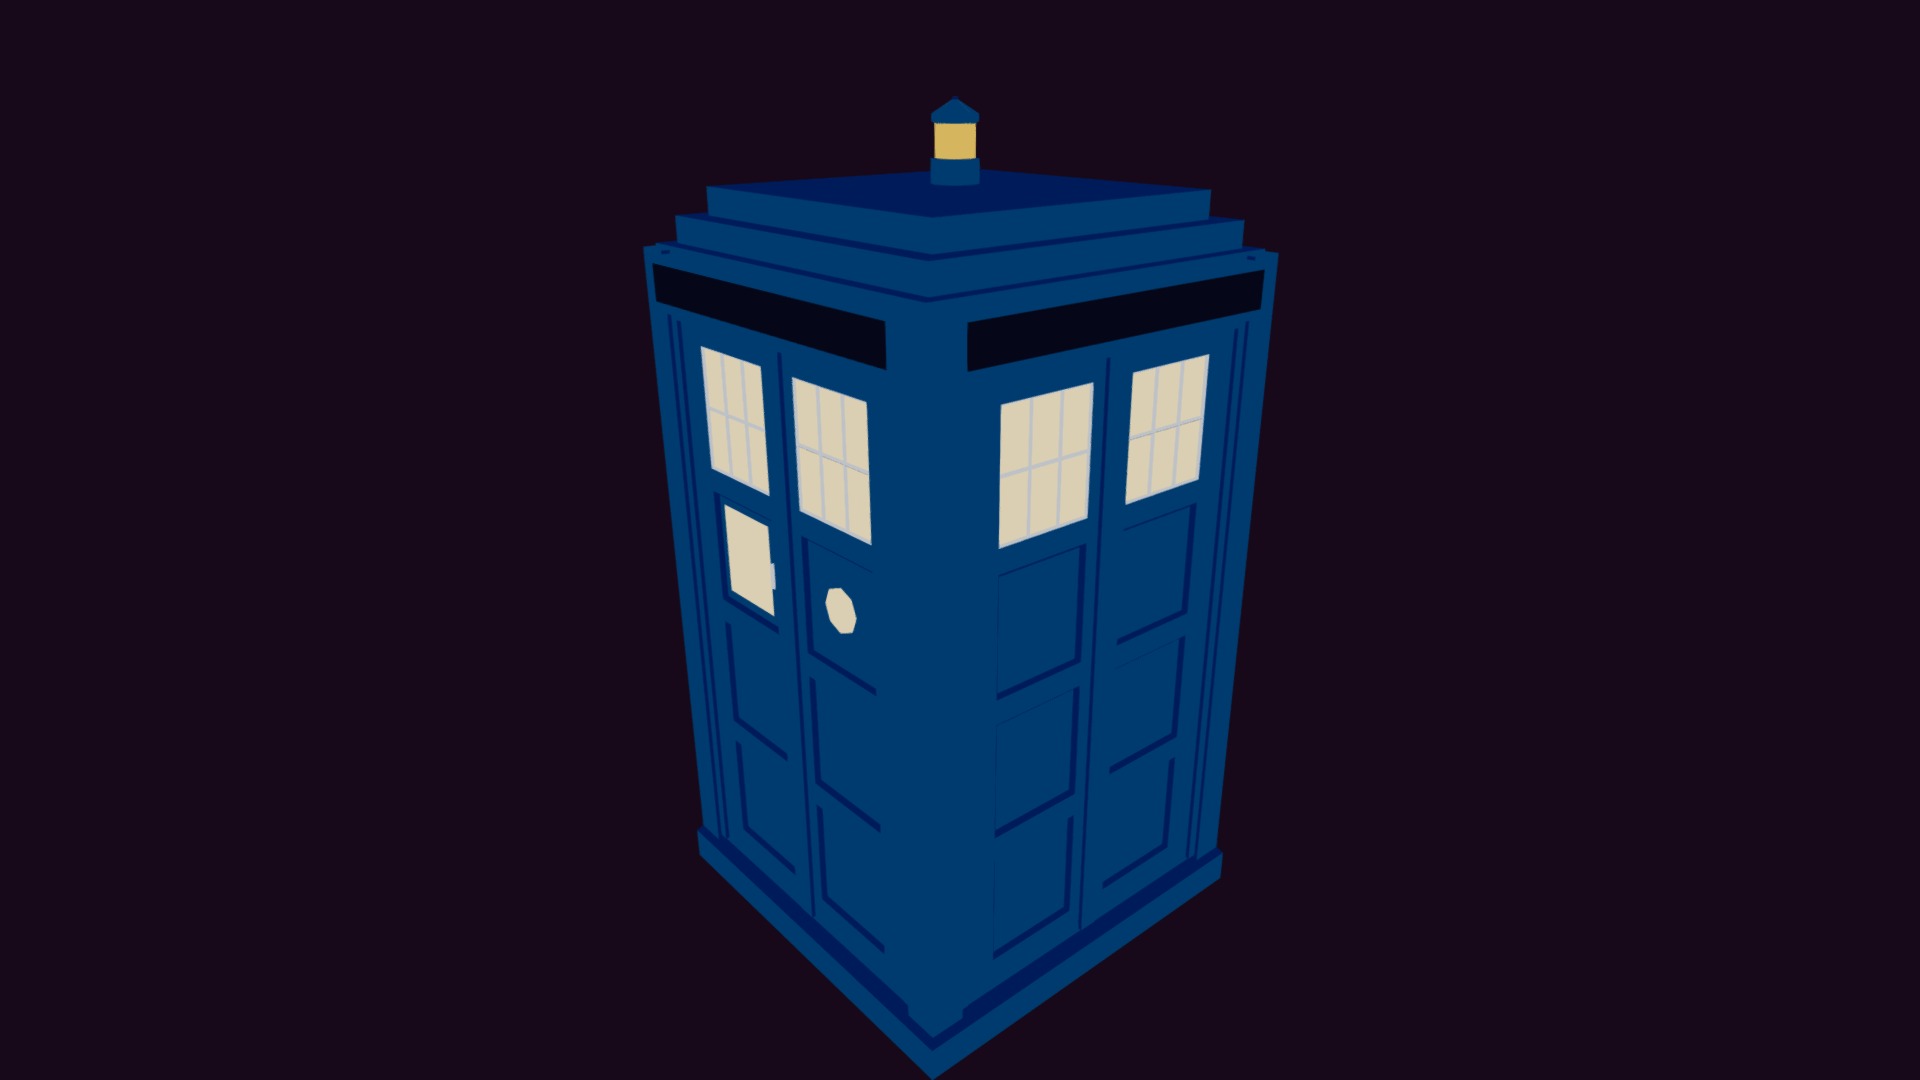 3D model Lowpoly Stylized Tardis - This is a 3D model of the Lowpoly Stylized Tardis. The 3D model is about a blue house with a black background.